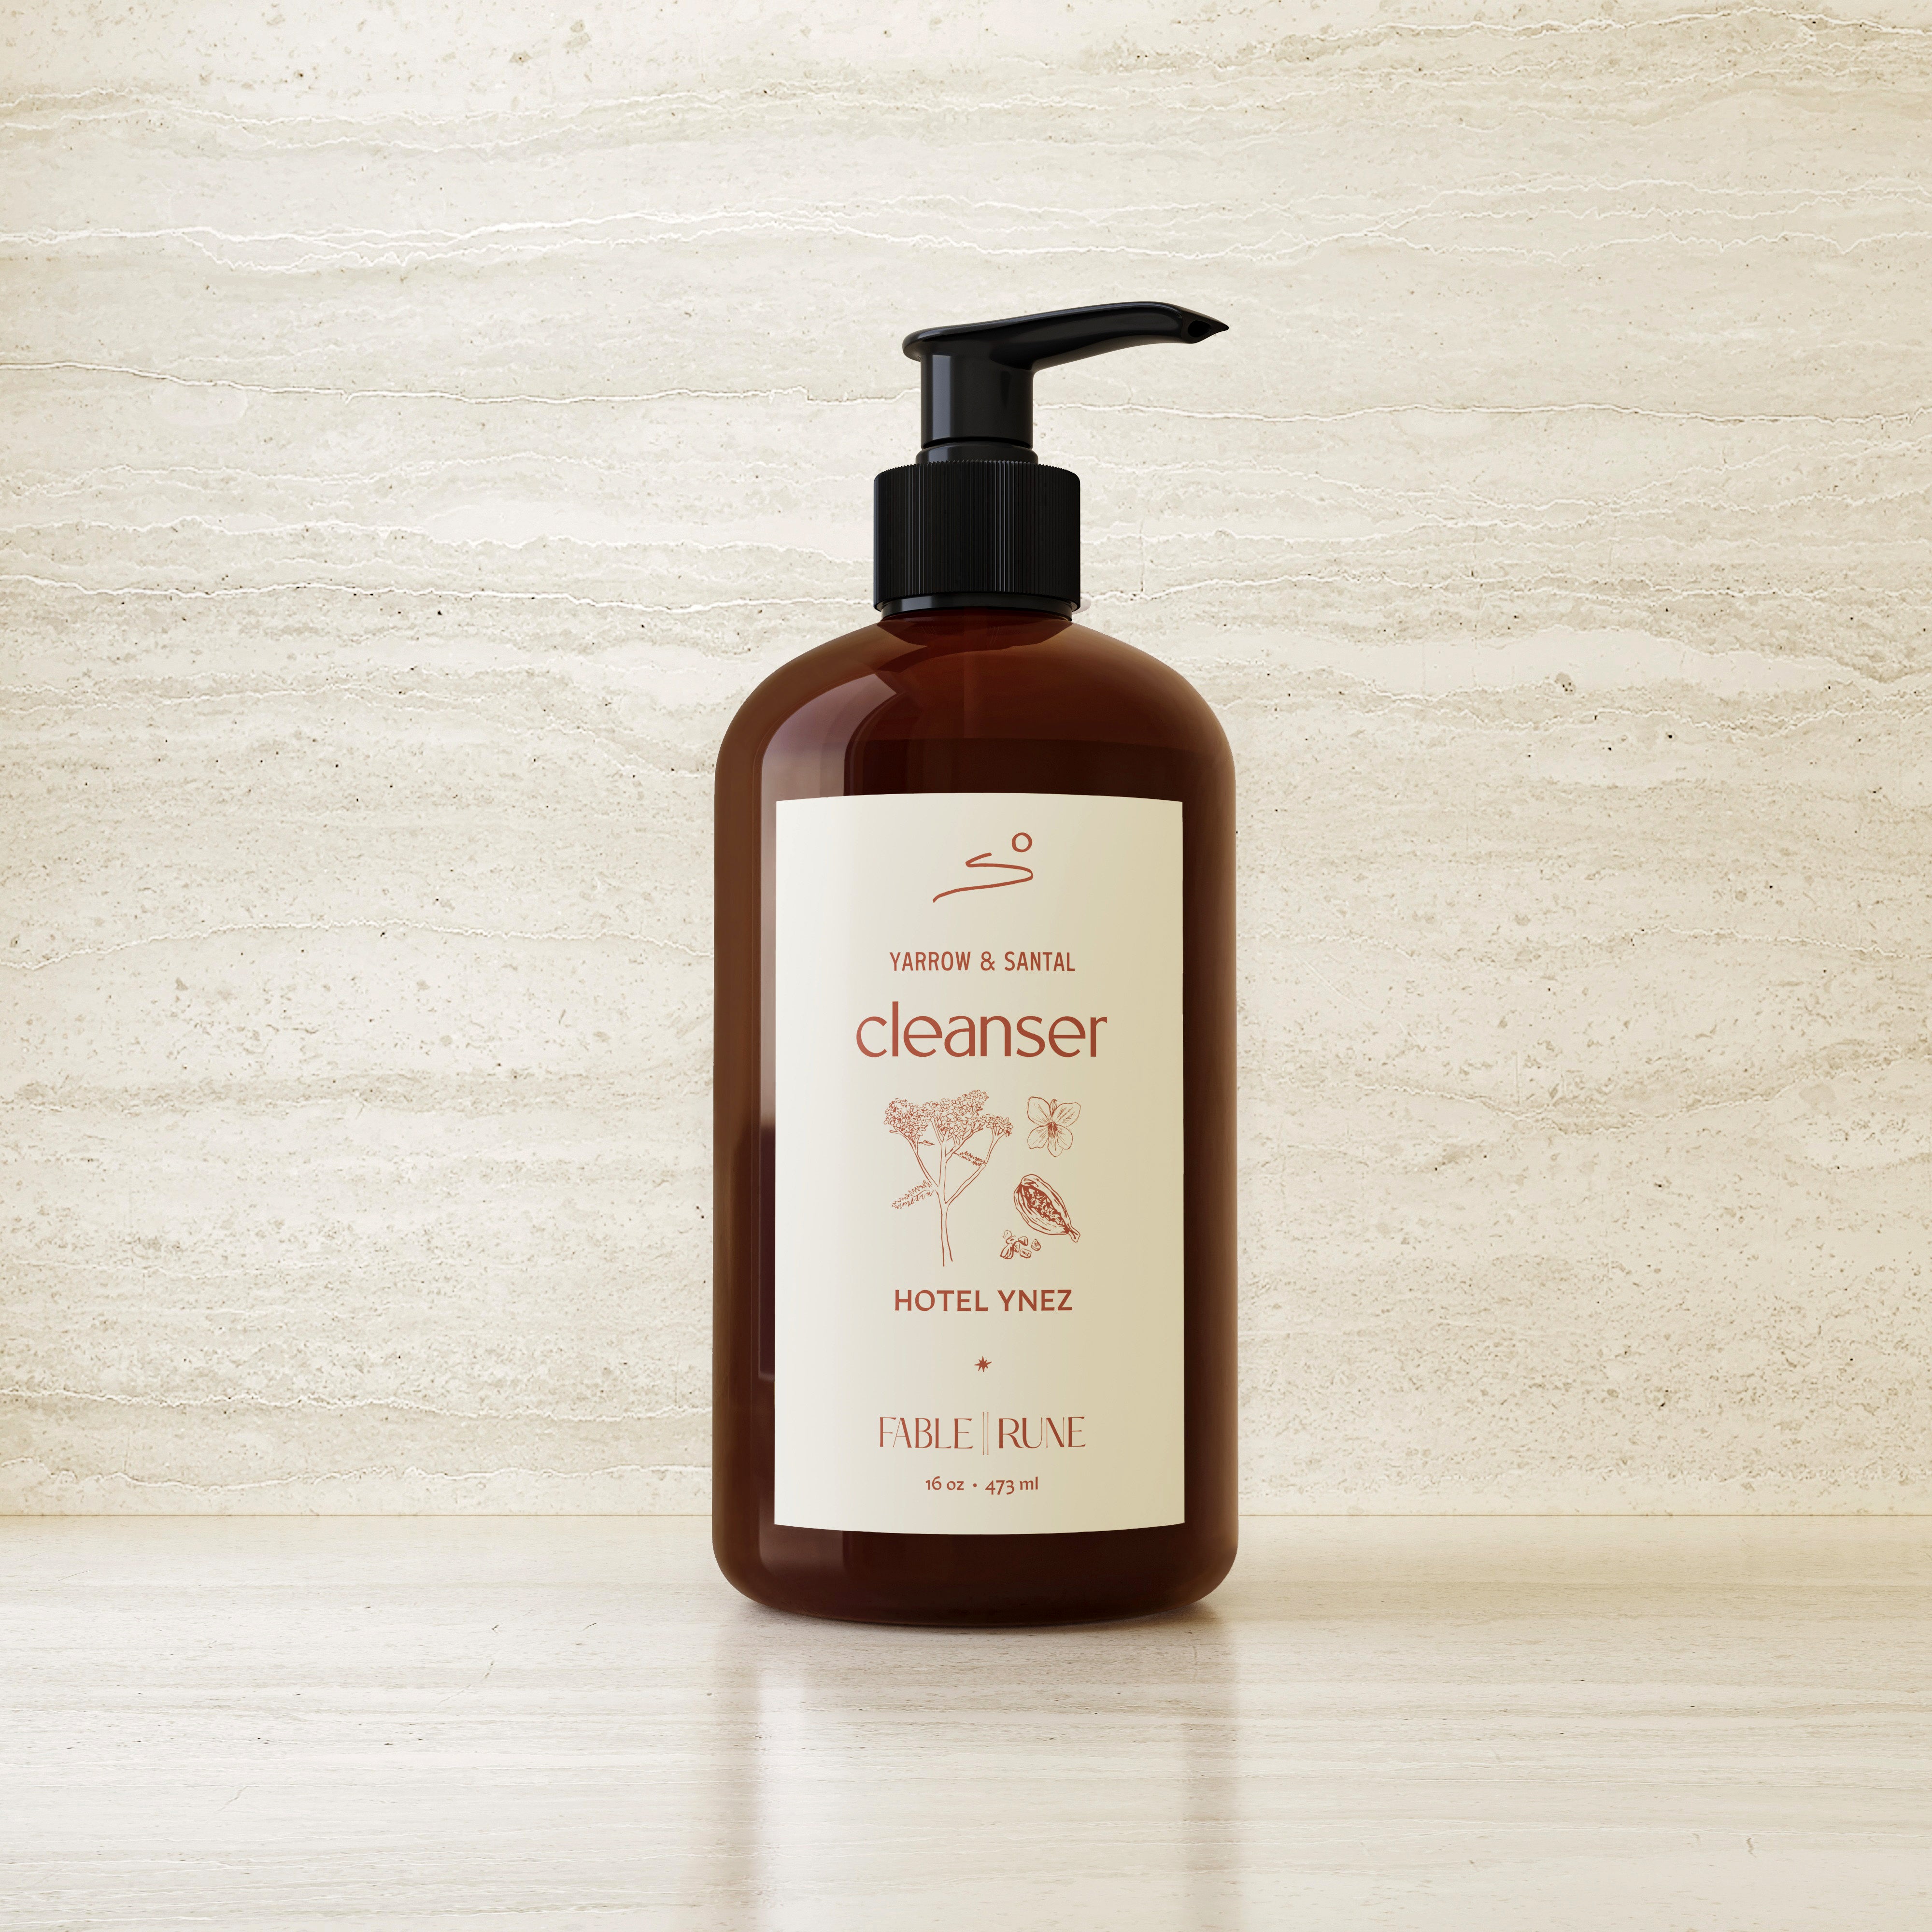 Yarrow &amp; Santal Cleanser Fable Rune for Hotel Ynez Solvang by Nomada Deco